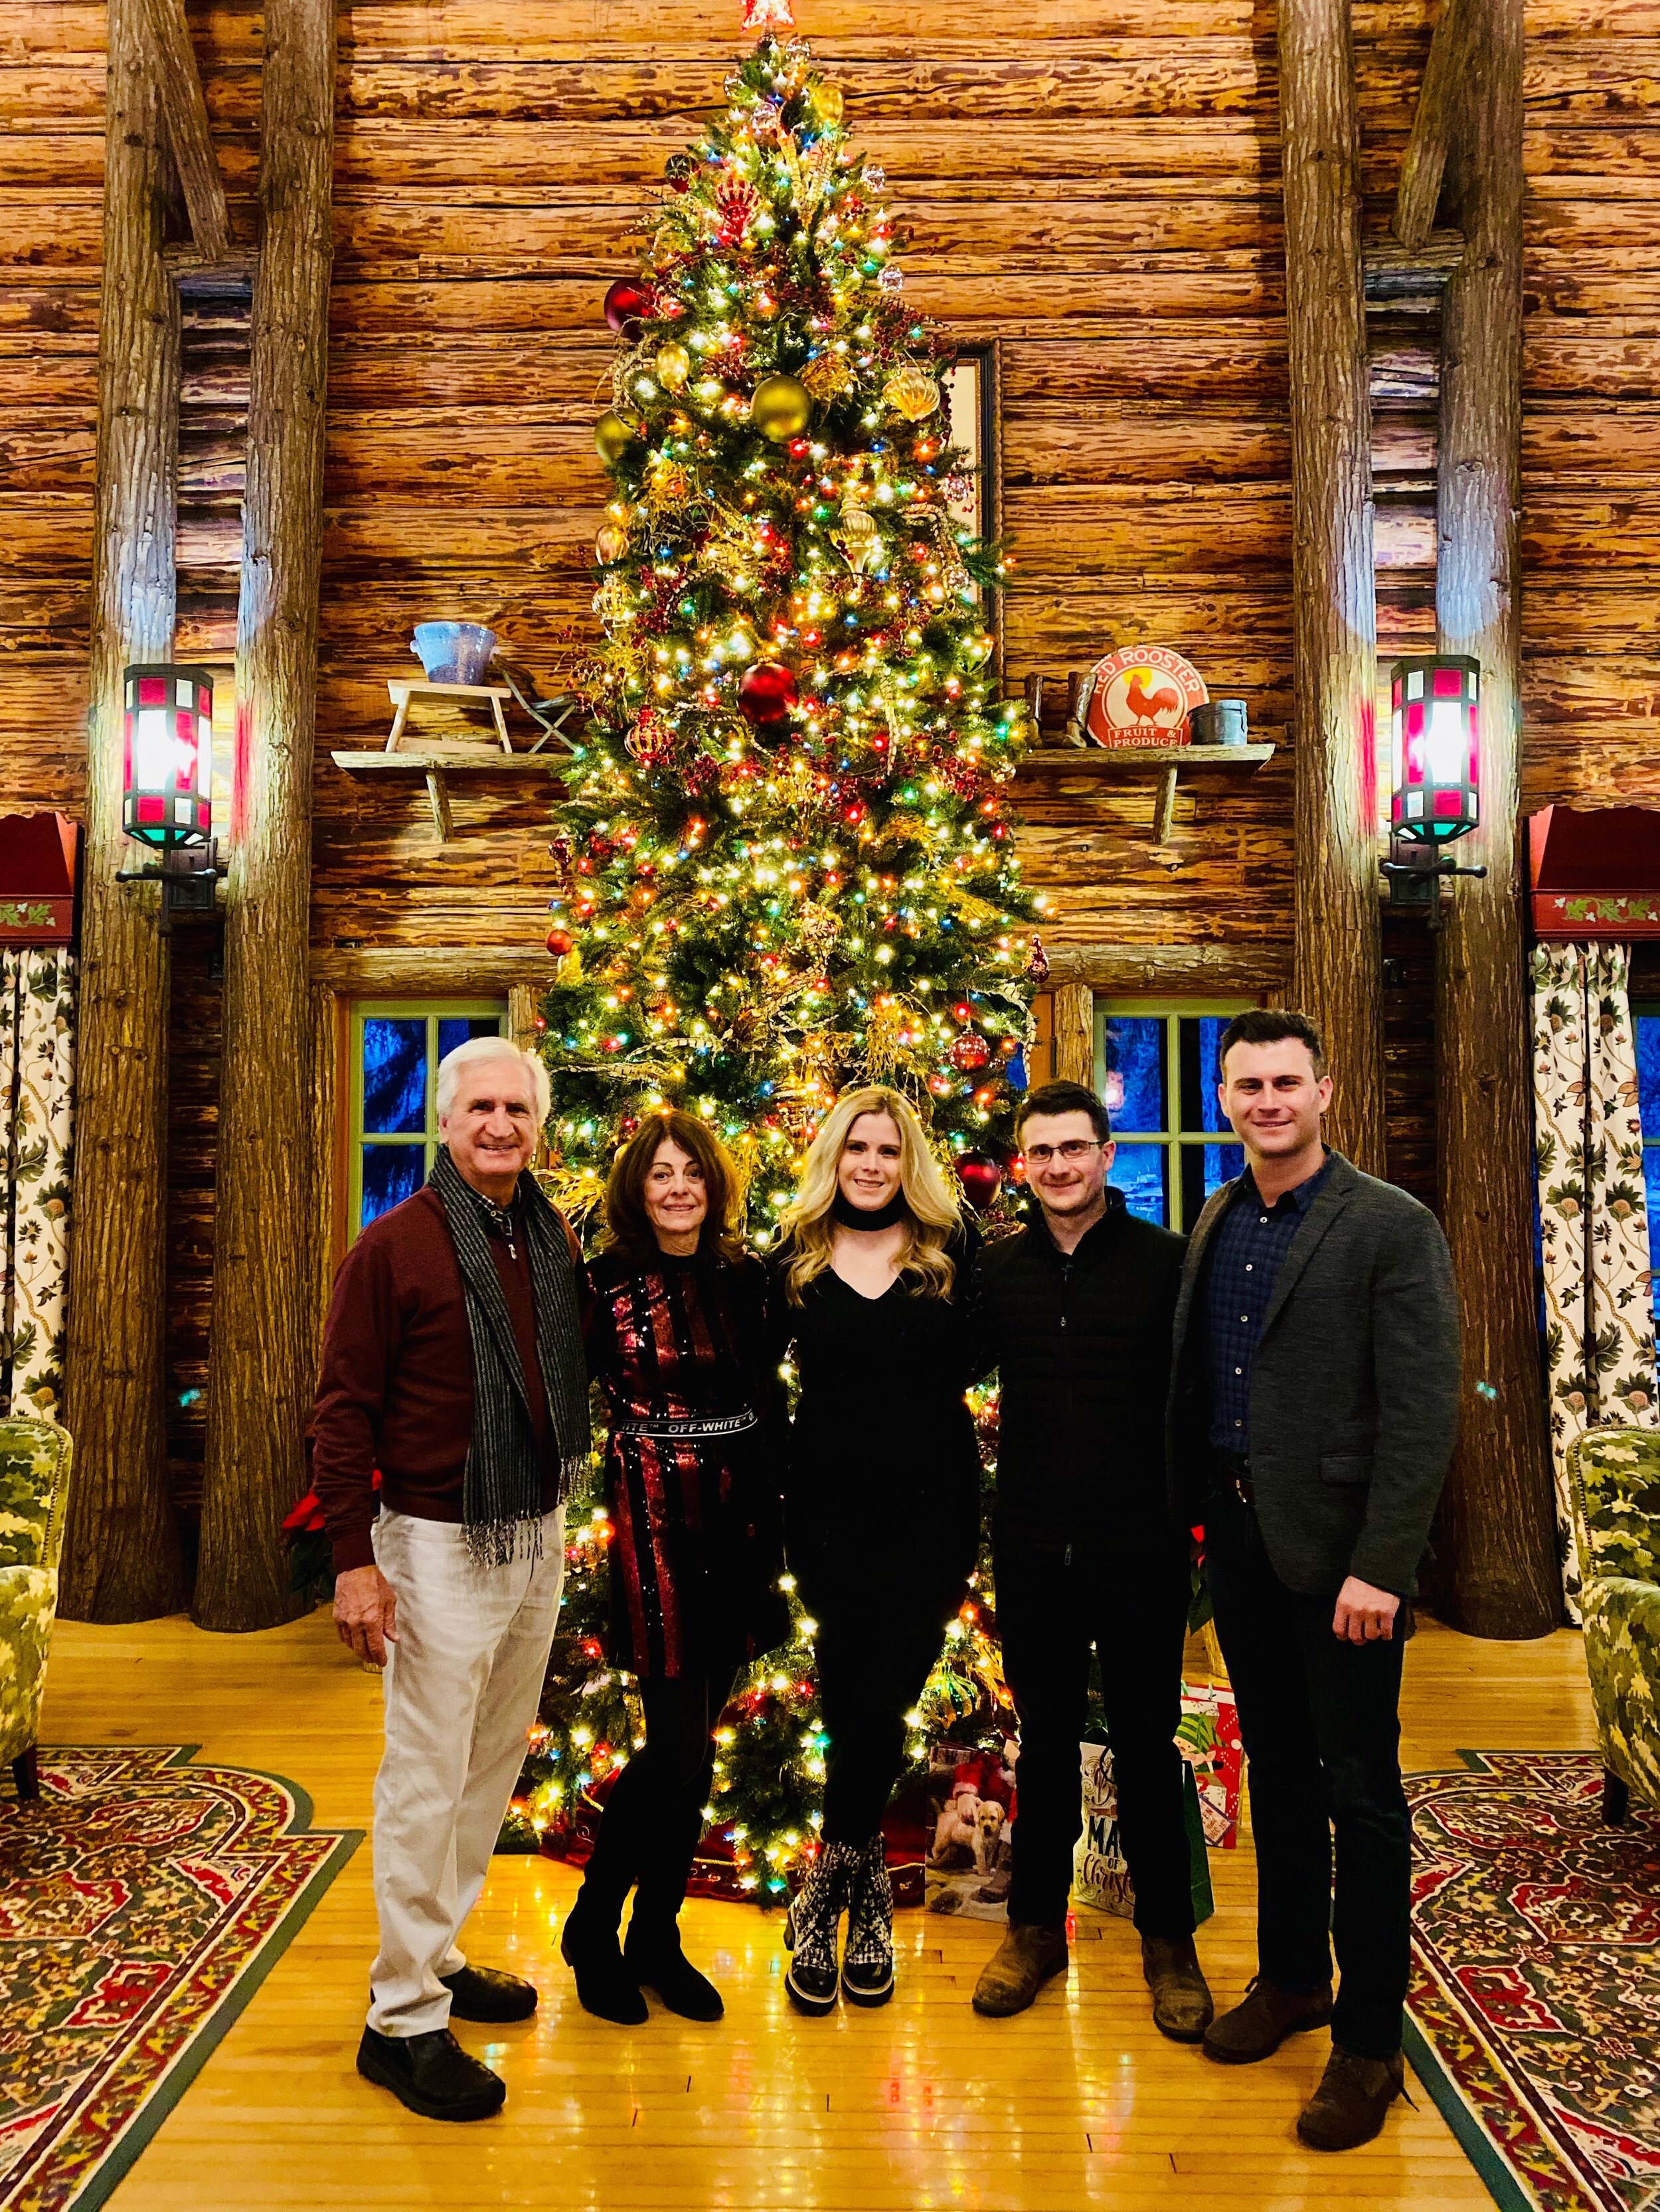  You can’t beat a family picture in front of the famous Kootenai Lodge Christmas tree!  